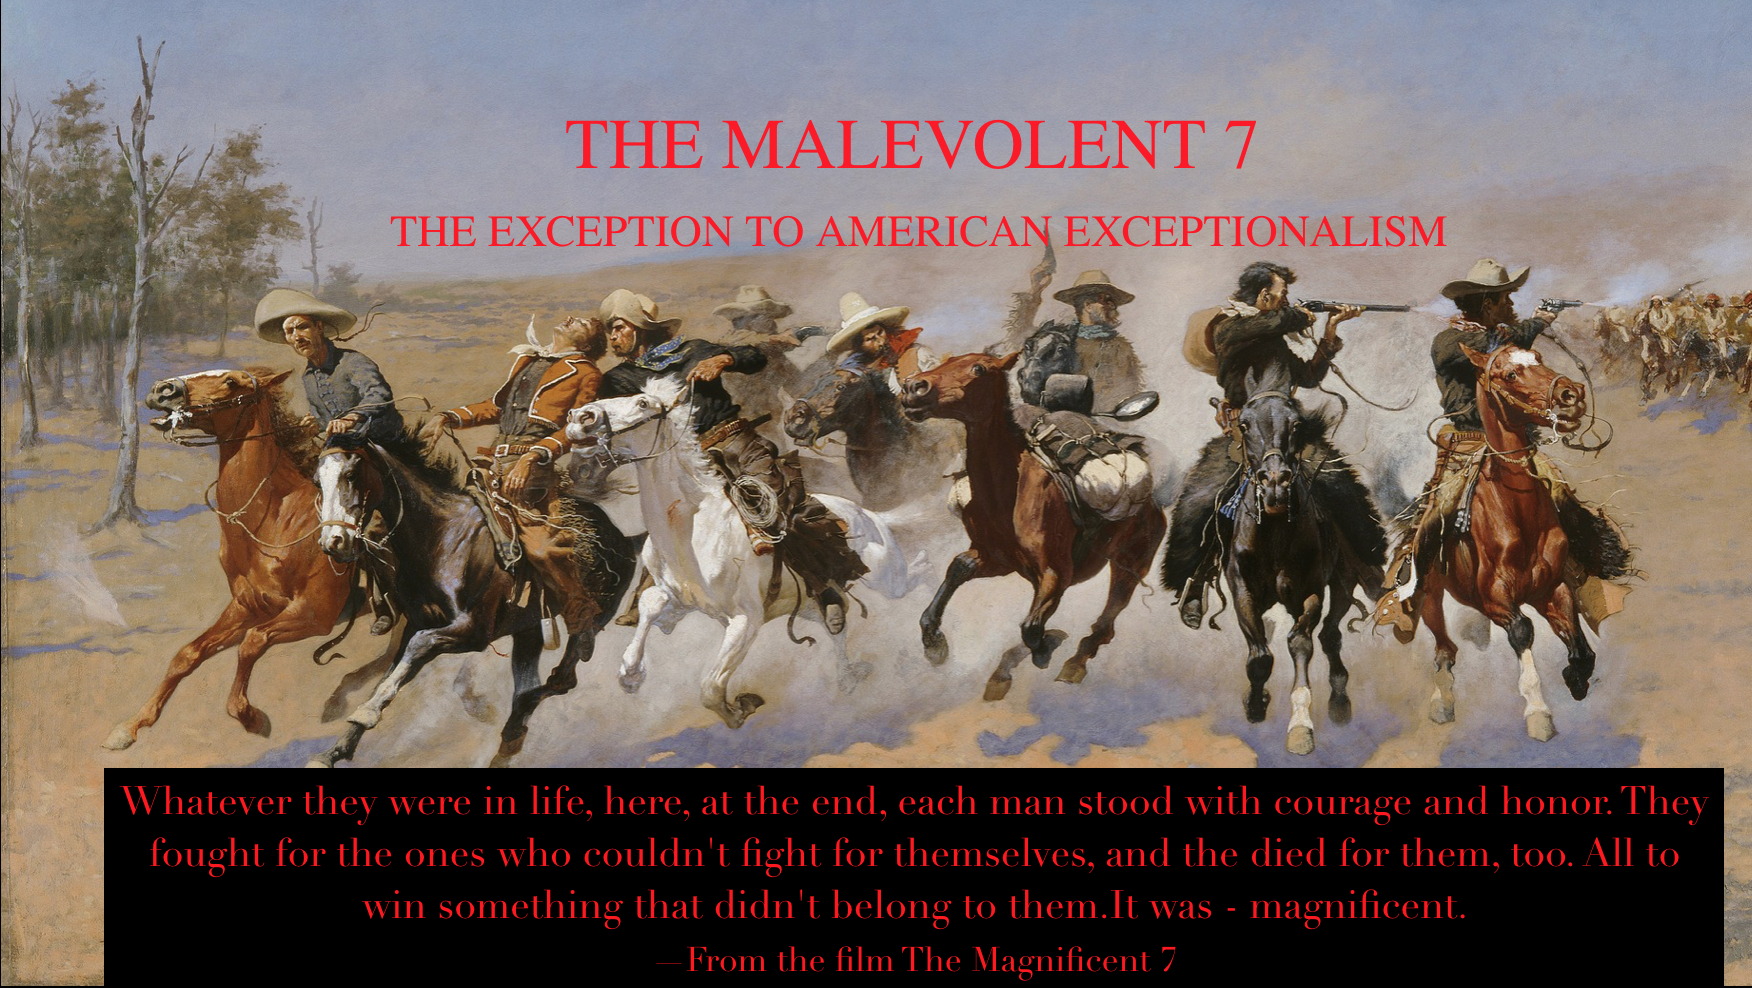 Featured image for “The Malevolent 7: The Exception to American Exceptionalism”